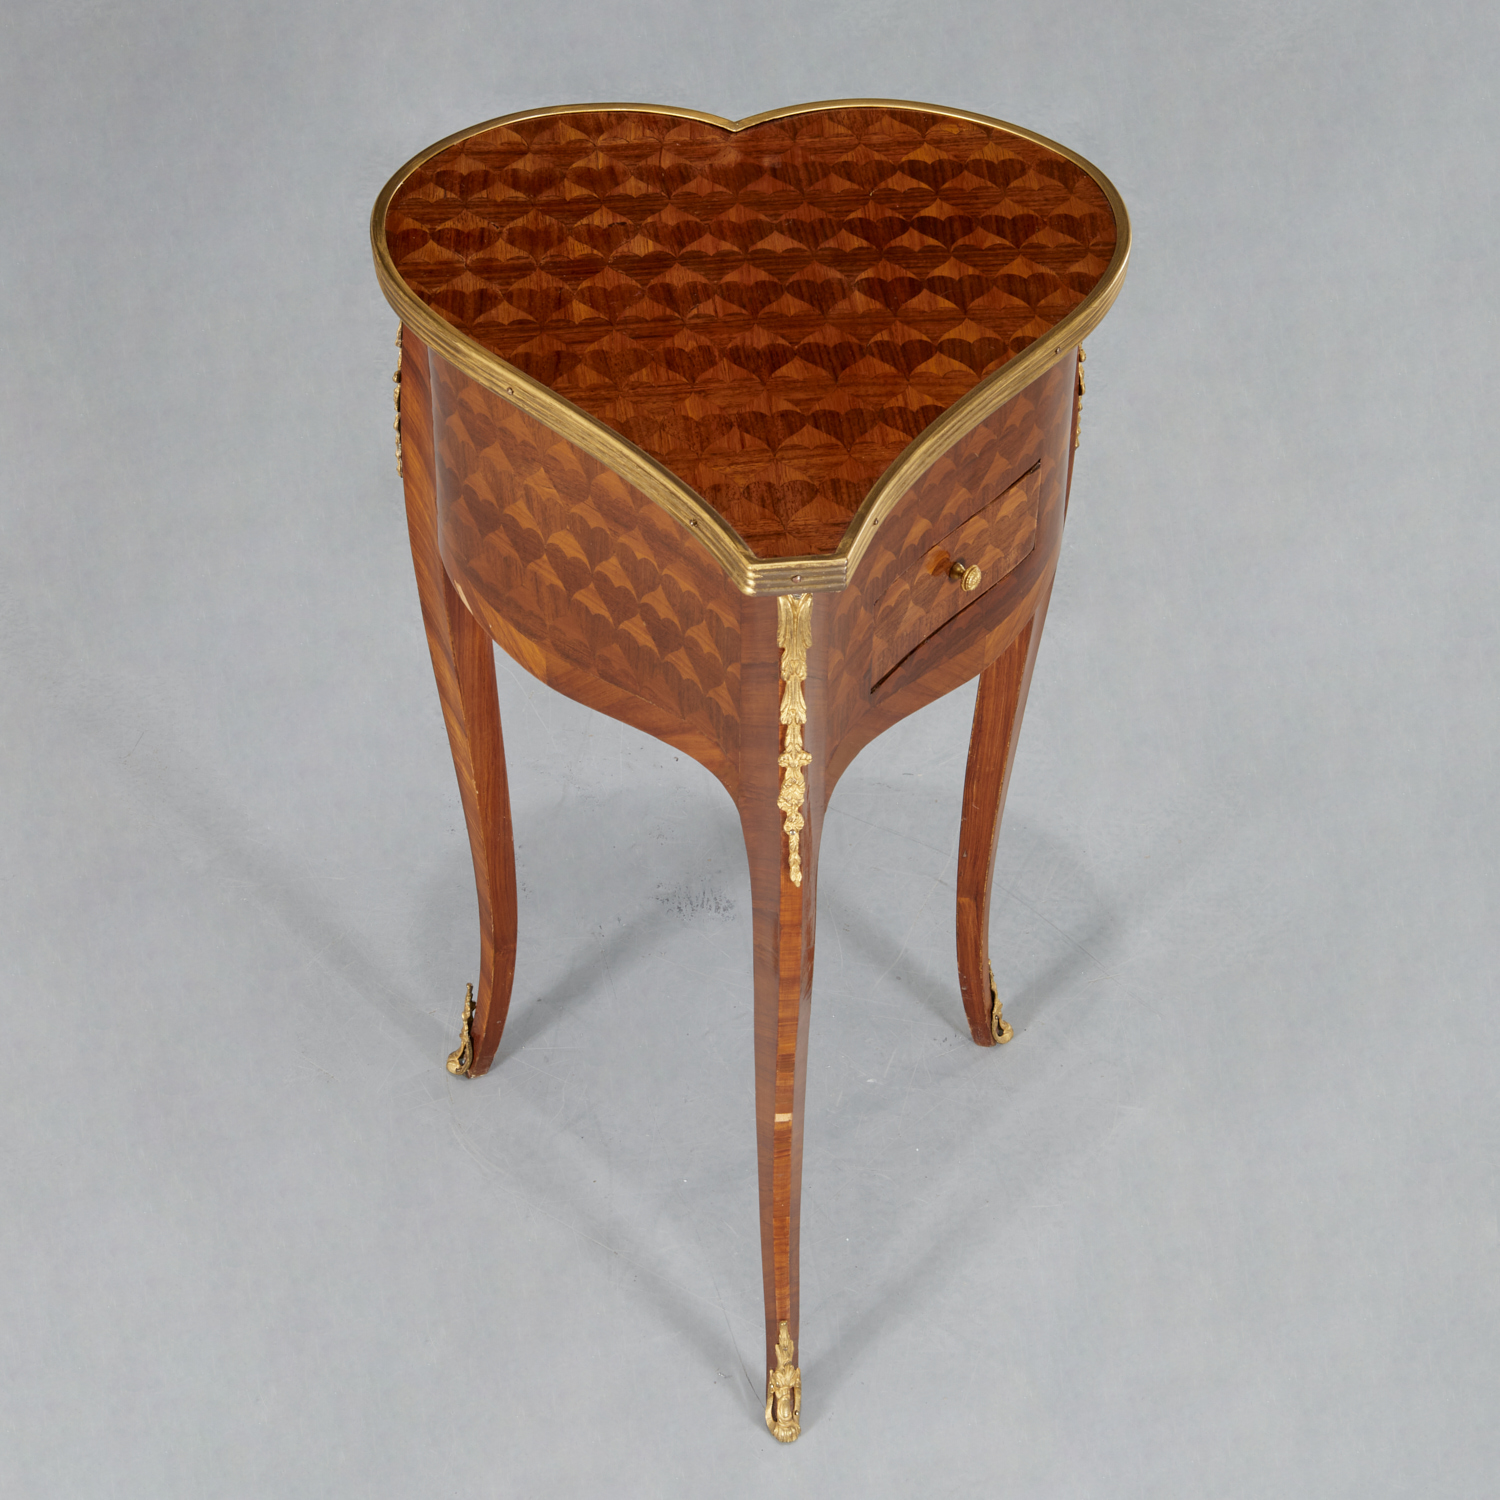 LOUIS XVI STYLE HEART-SHAPED PARQUETRY